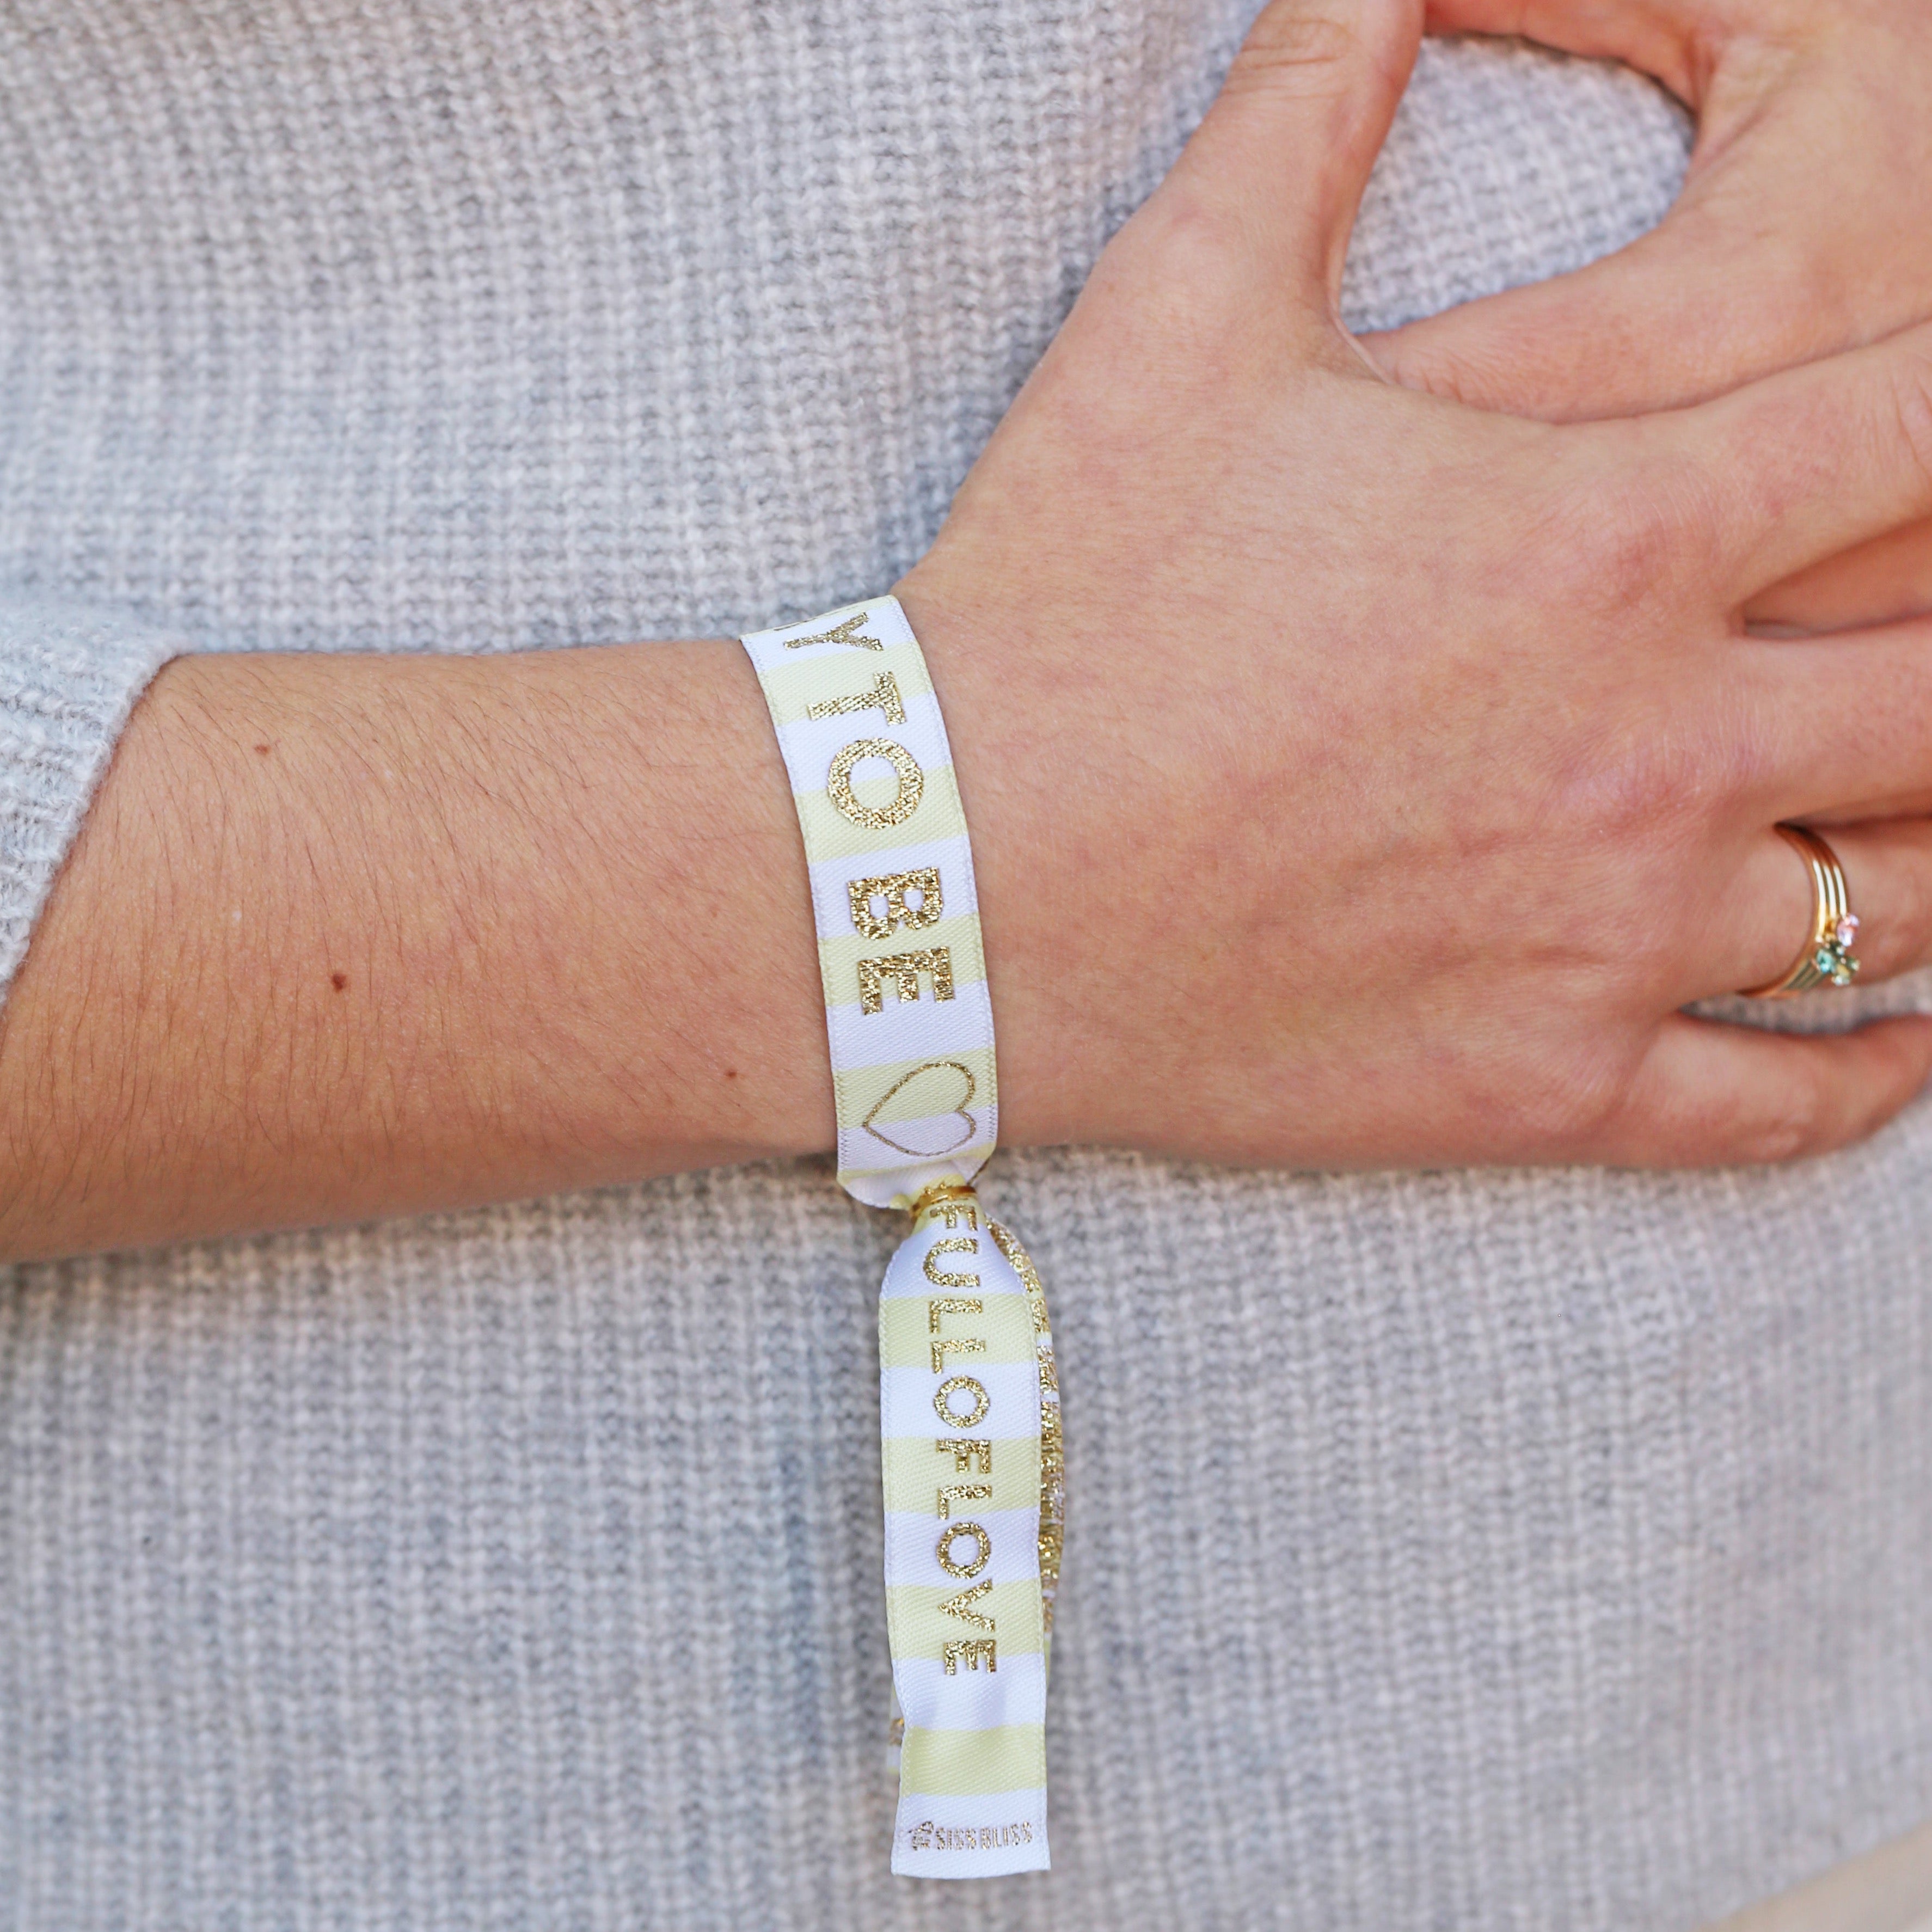 MOMMY TO BE Bracelets - The SISS BLISS GmbH